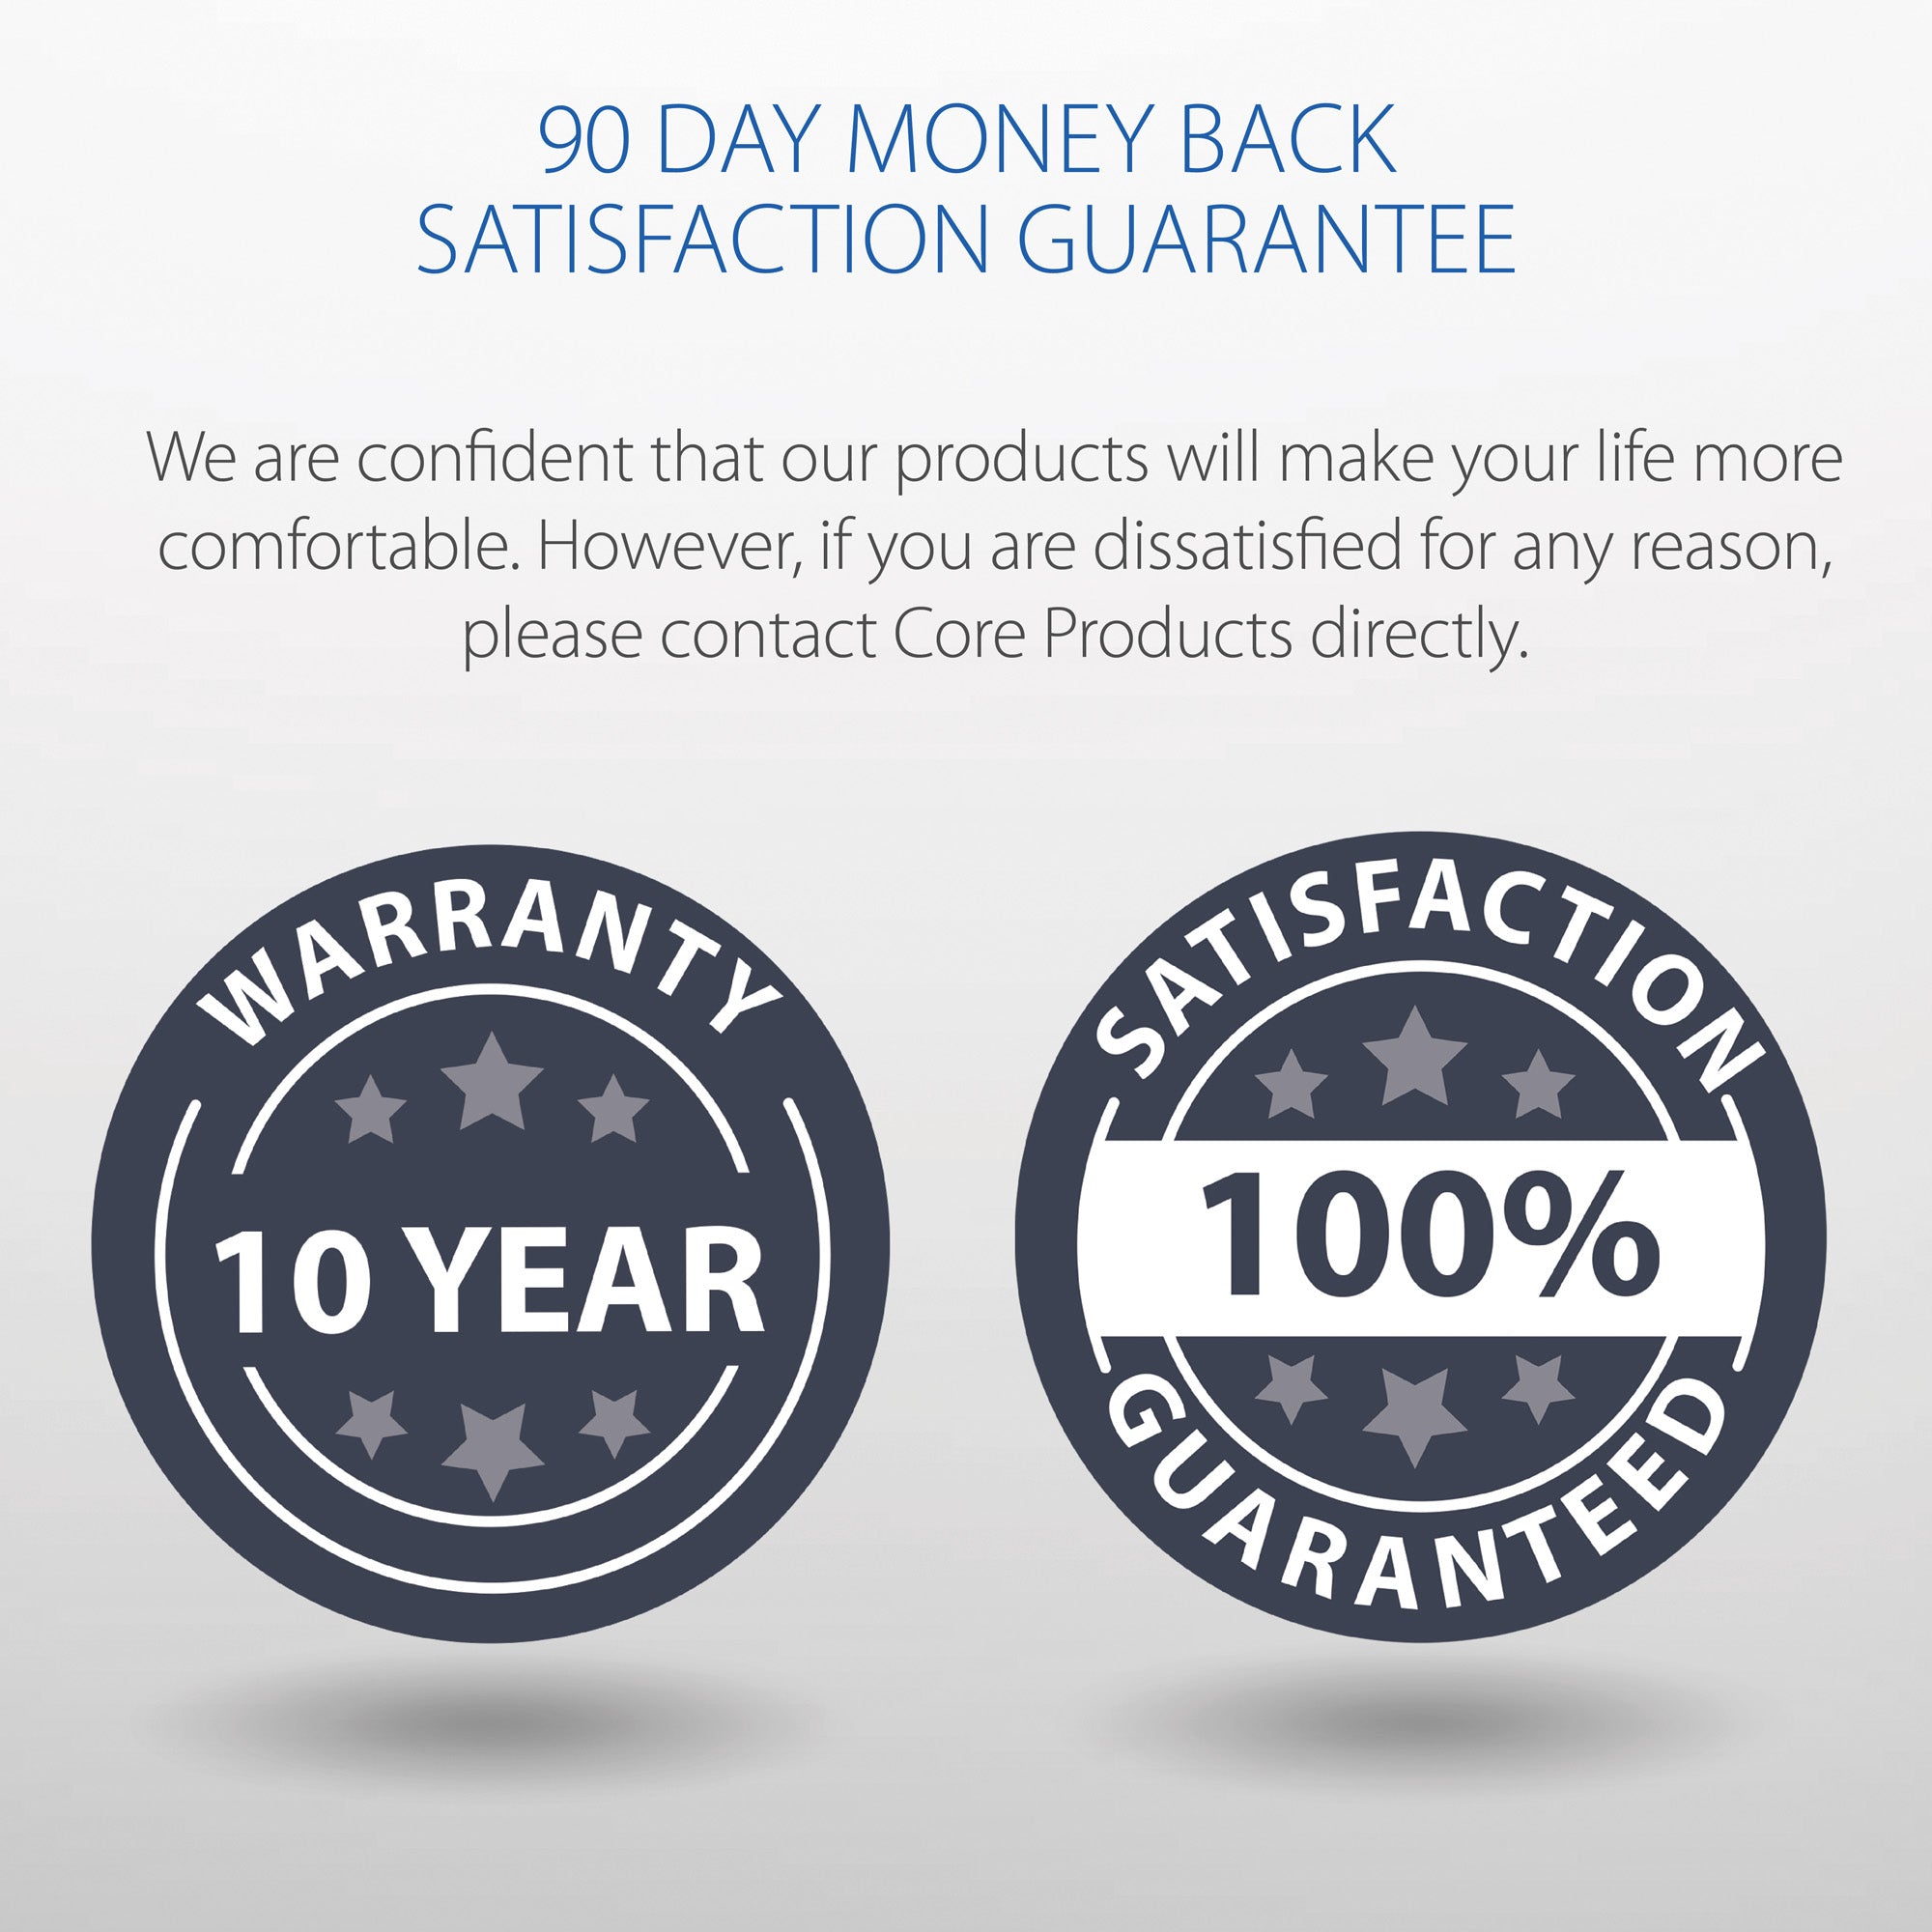 90 day money back satisfaction guarantee by Core Products